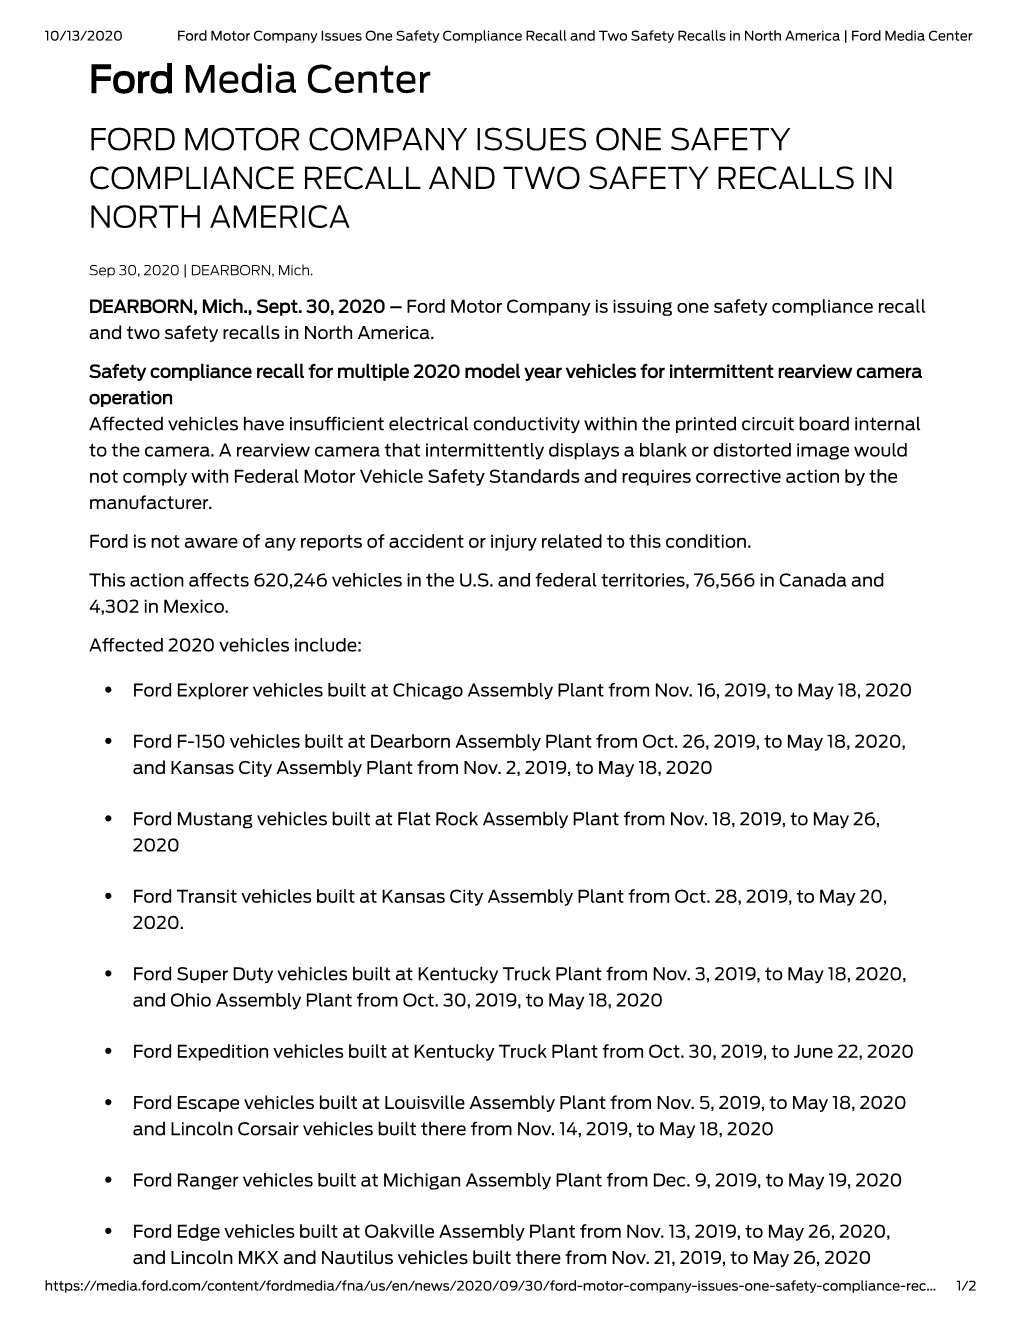 Ford Media Center Ford Media Center FORD MOTOR COMPANY ISSUES ONE SAFETY COMPLIANCE RECALL and TWO SAFETY RECALLS in NORTH AMERICA